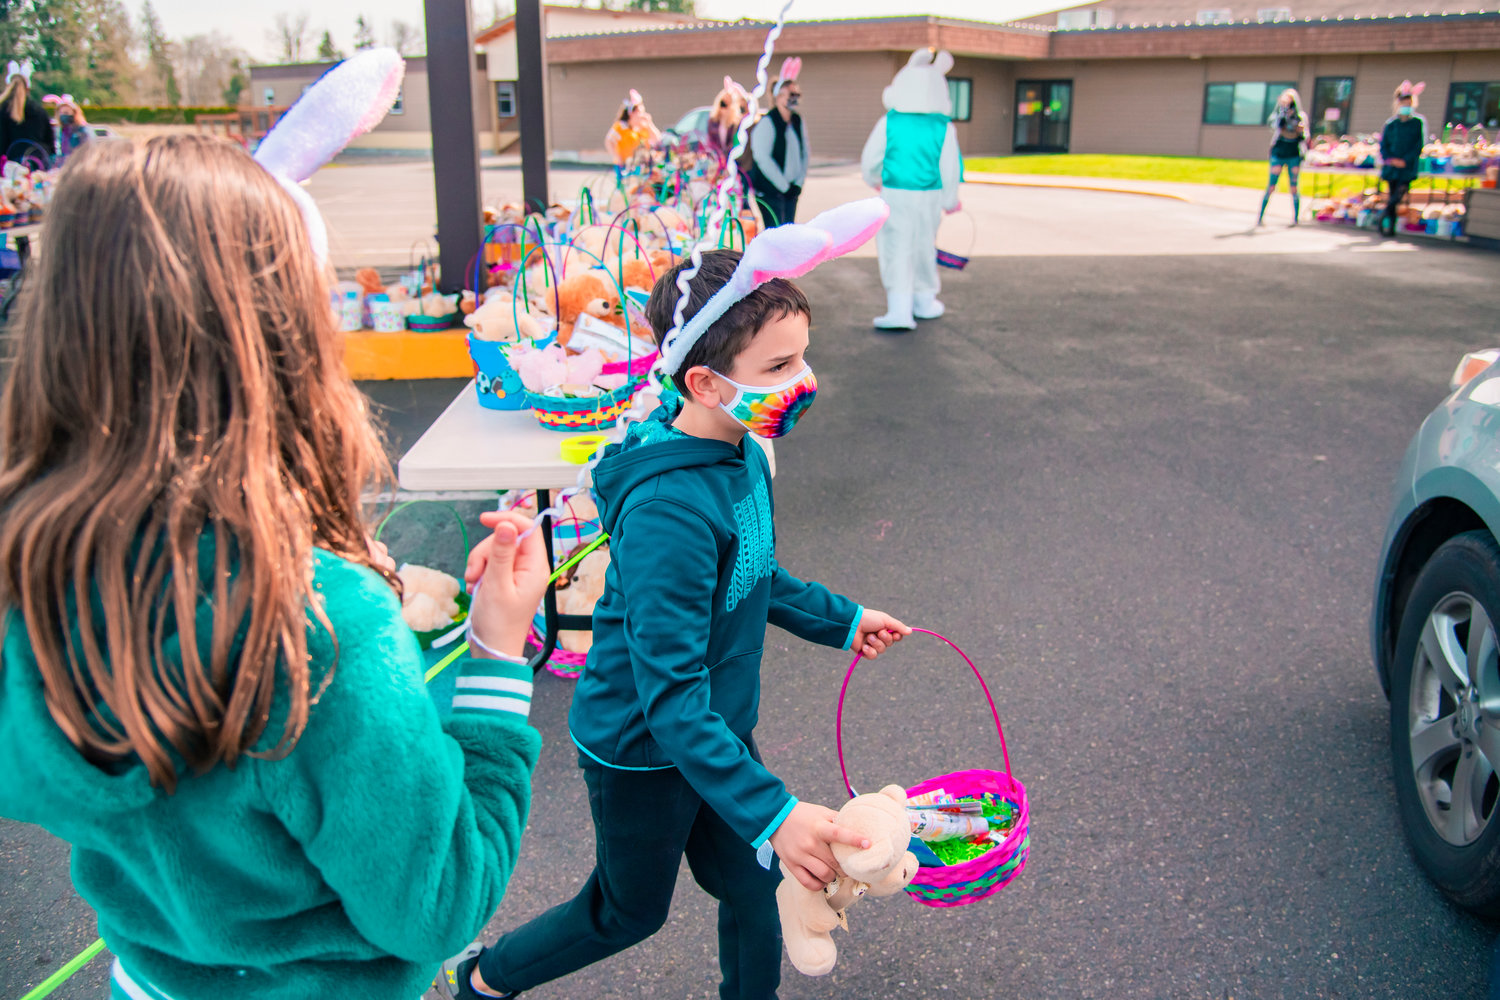 Antonio and Sophia Abbarno help hand out Easter baskets at Bethel Church in Chehalis on Saturday.